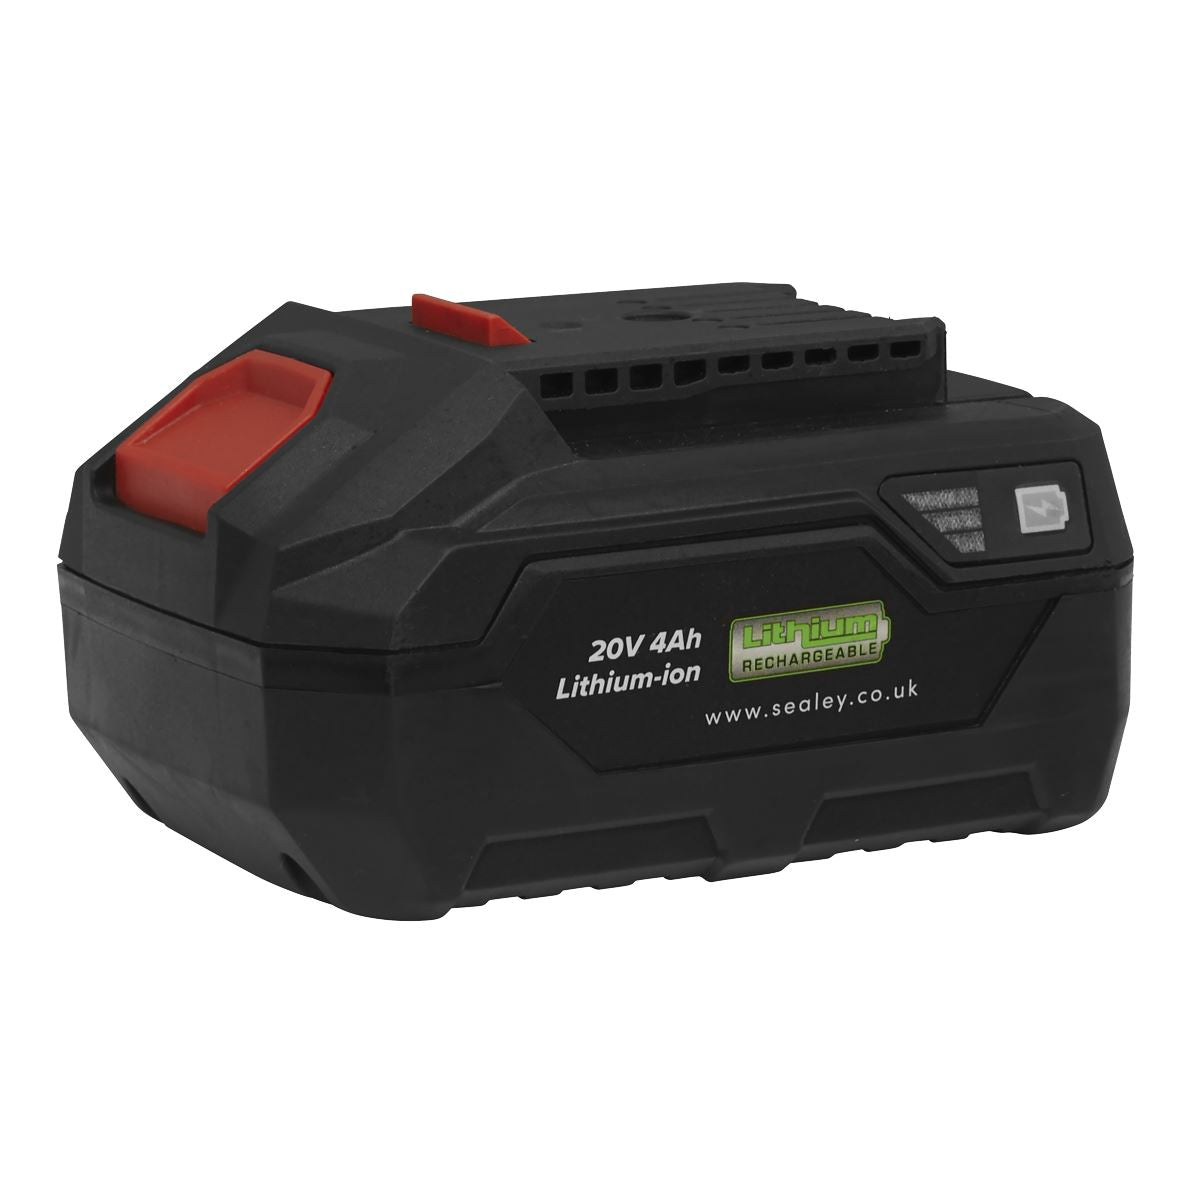 Sealey 20V SV20 Series Cordless Trimming Router Kit 4Ah - 1 Battery